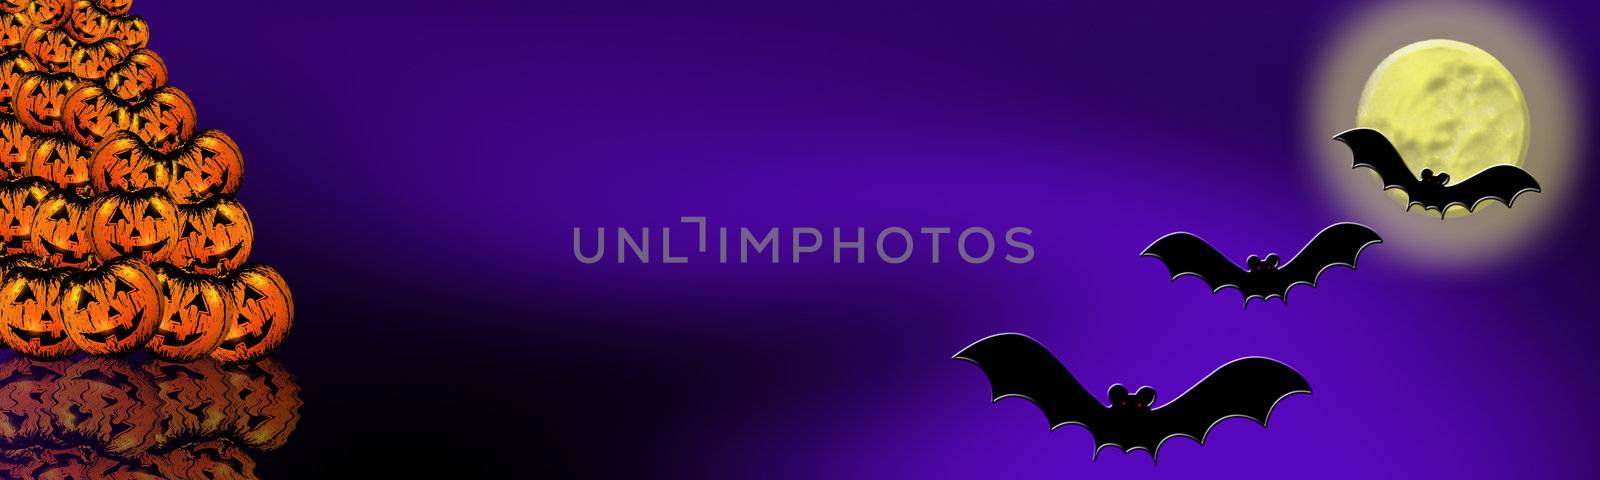 Illustration of Halloween for web banners or graphics